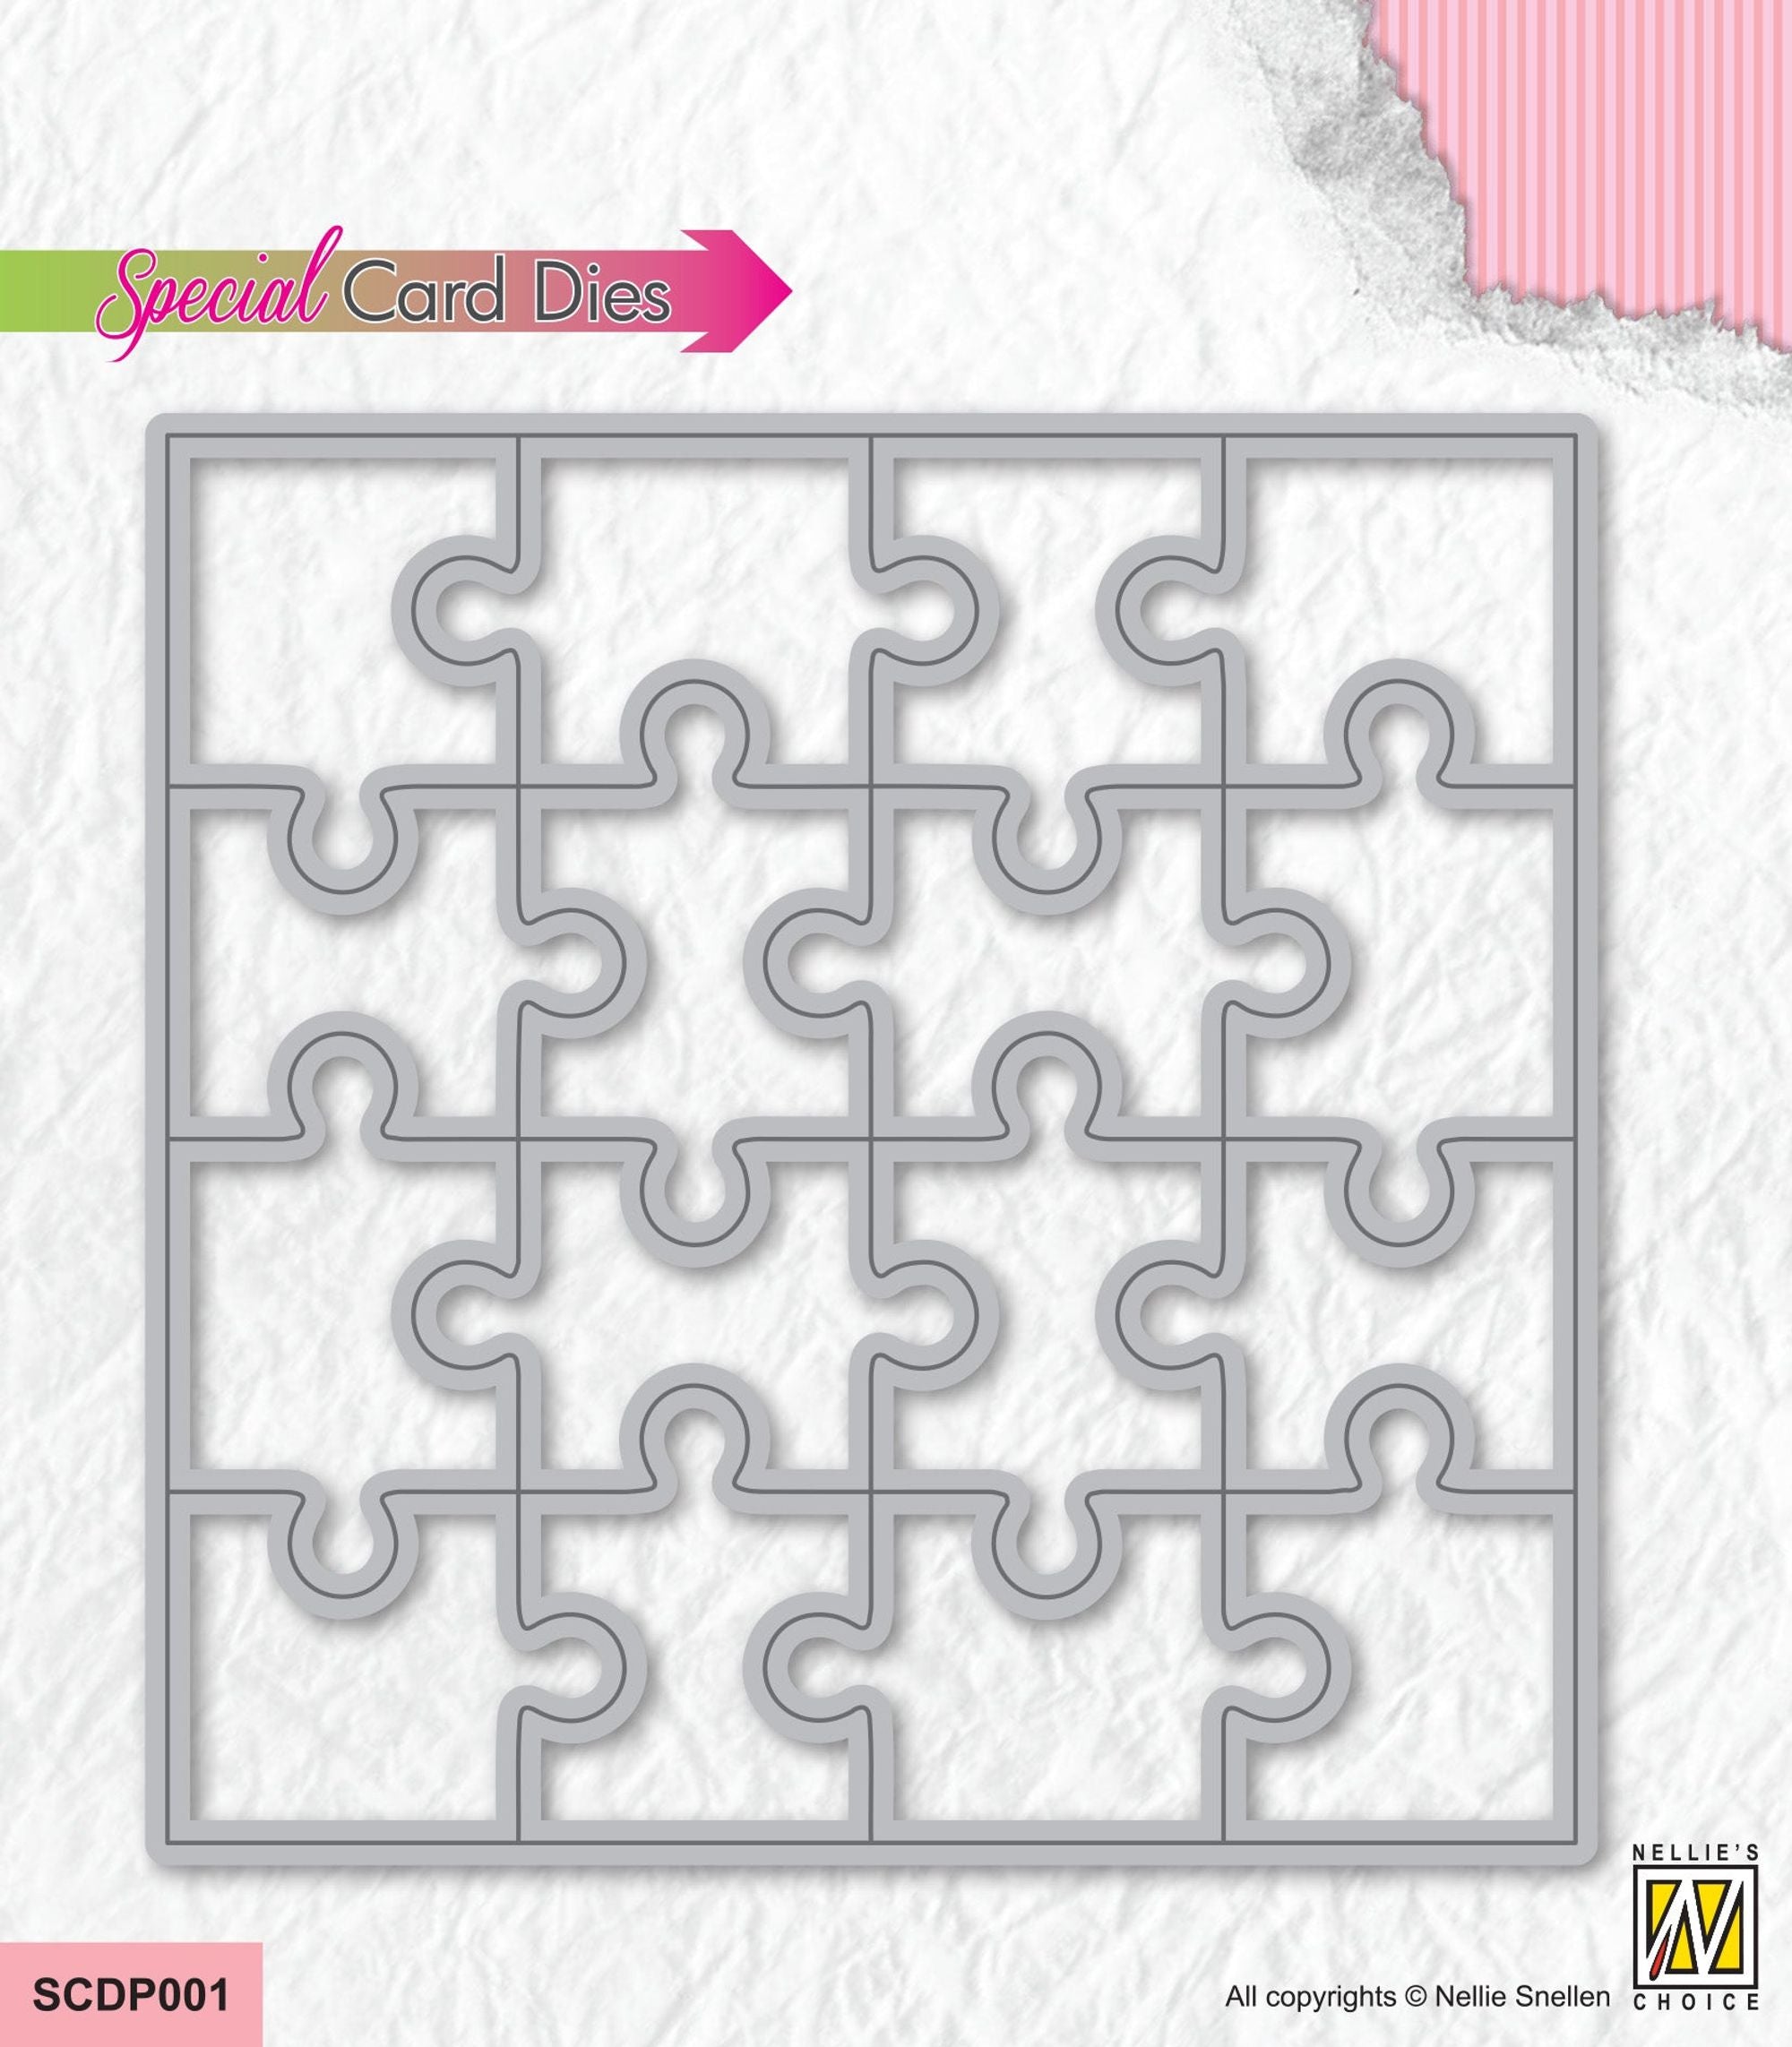 Nellie's Choice Special Card Dies - Square Puzzle